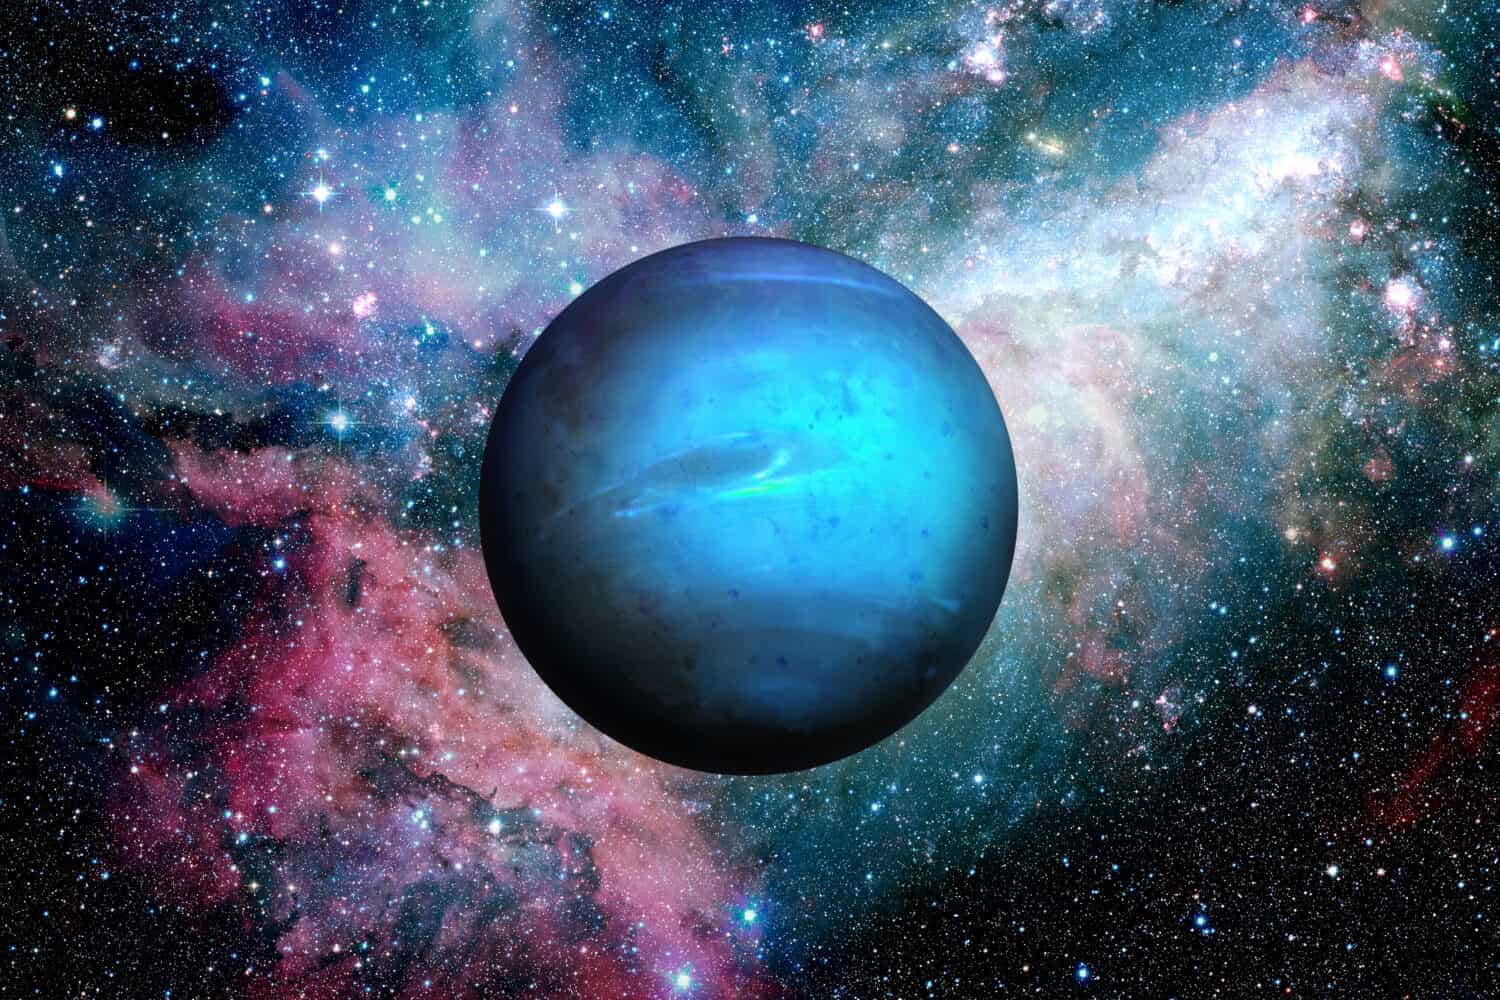 Solar System - Neptune. It is the eighth and farthest planet from the Sun in the Solar System. It is a giant planet. Neptune has 14 known satellites. Elements of this image furnished by NASA.